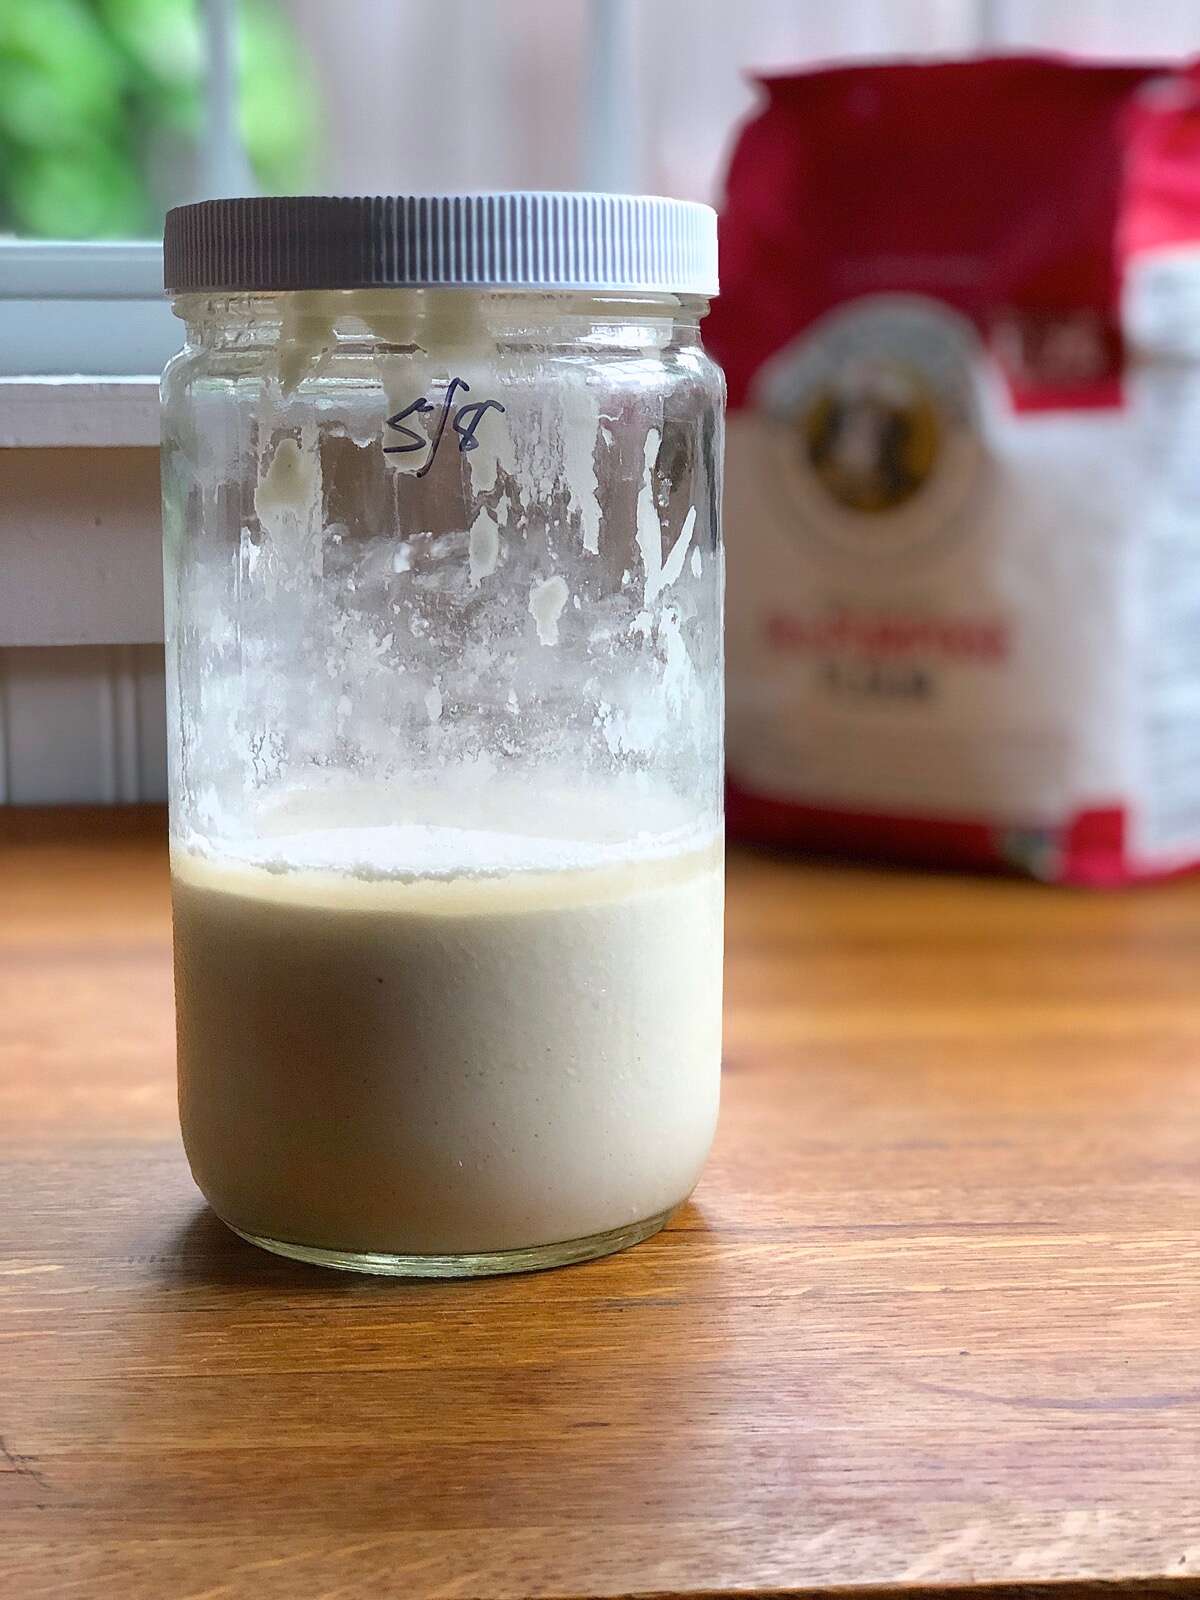 Sourdough starter in a straight-sided glass jar on a wooden table, bag of flour in the background.